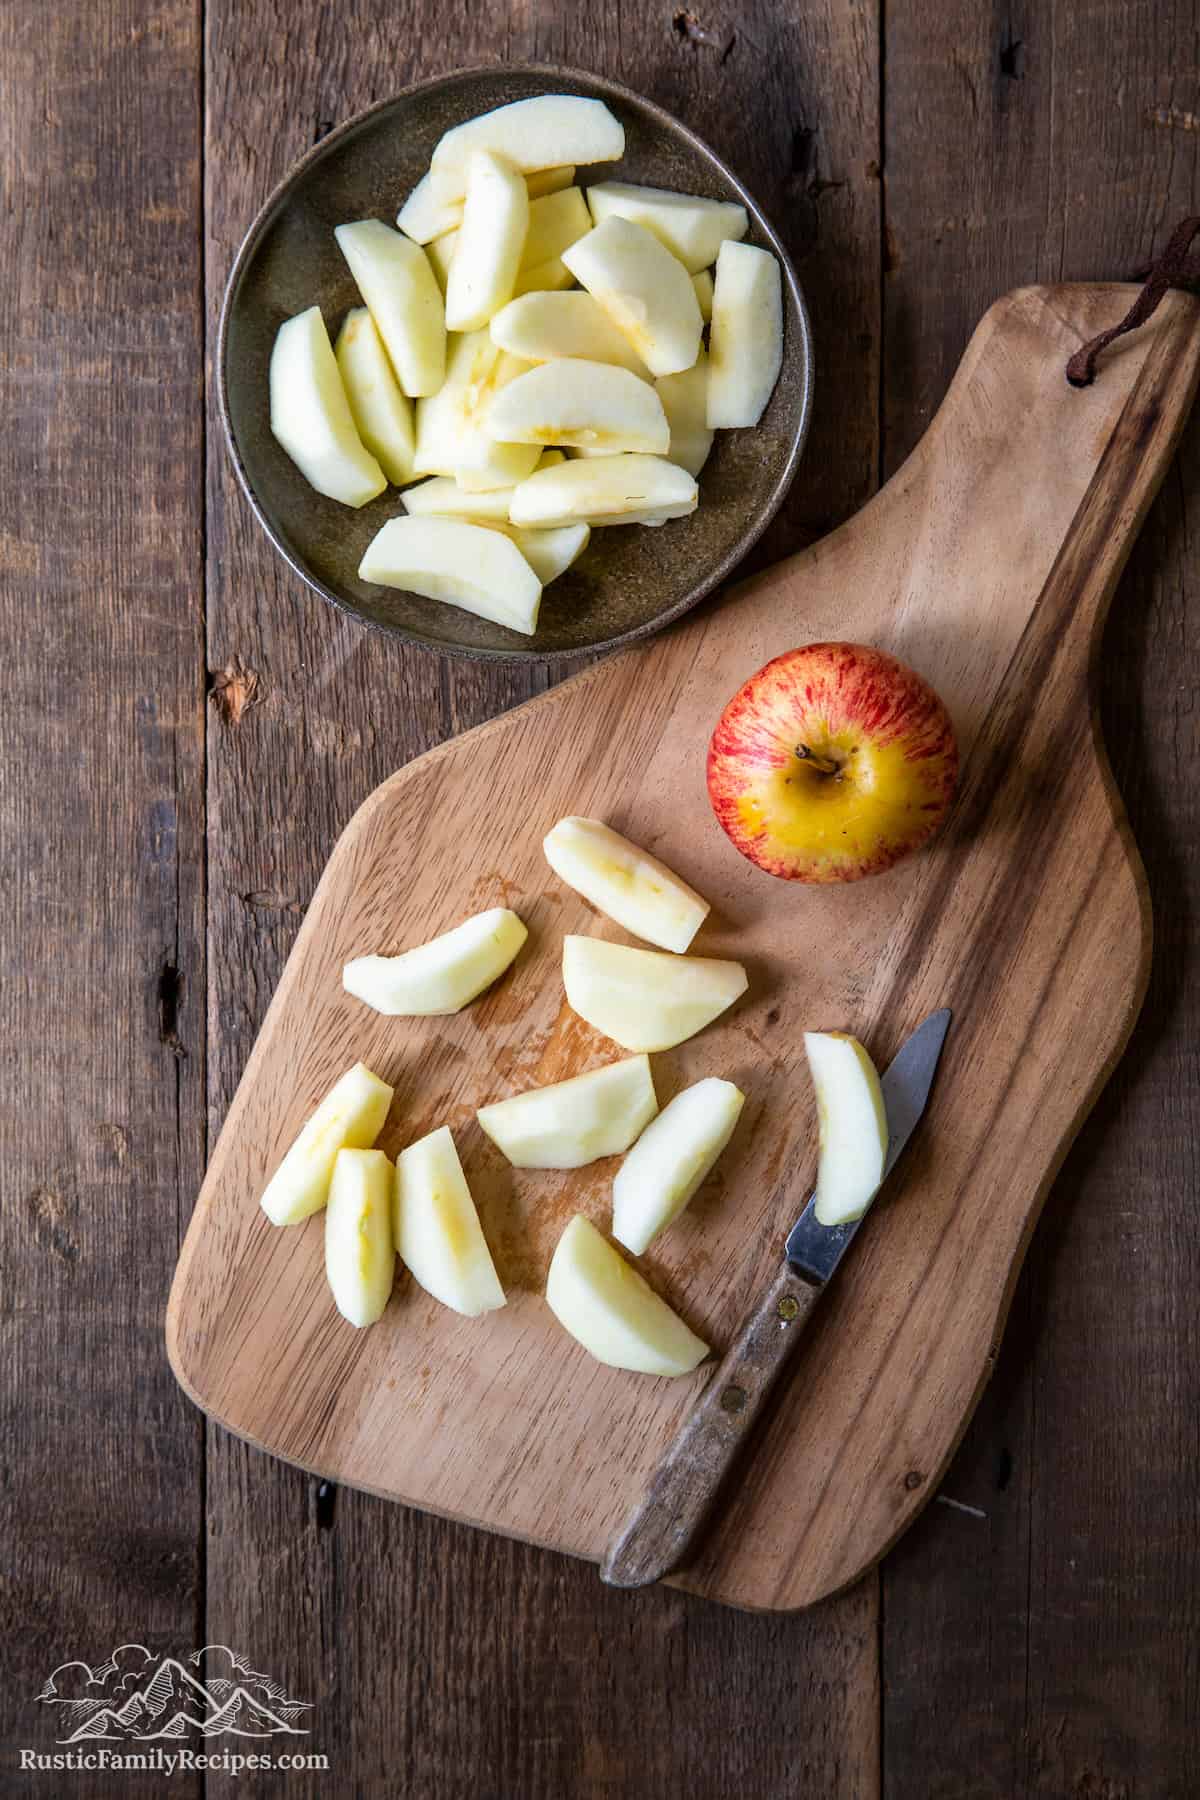 Overhead shot of apple slices on cutting board